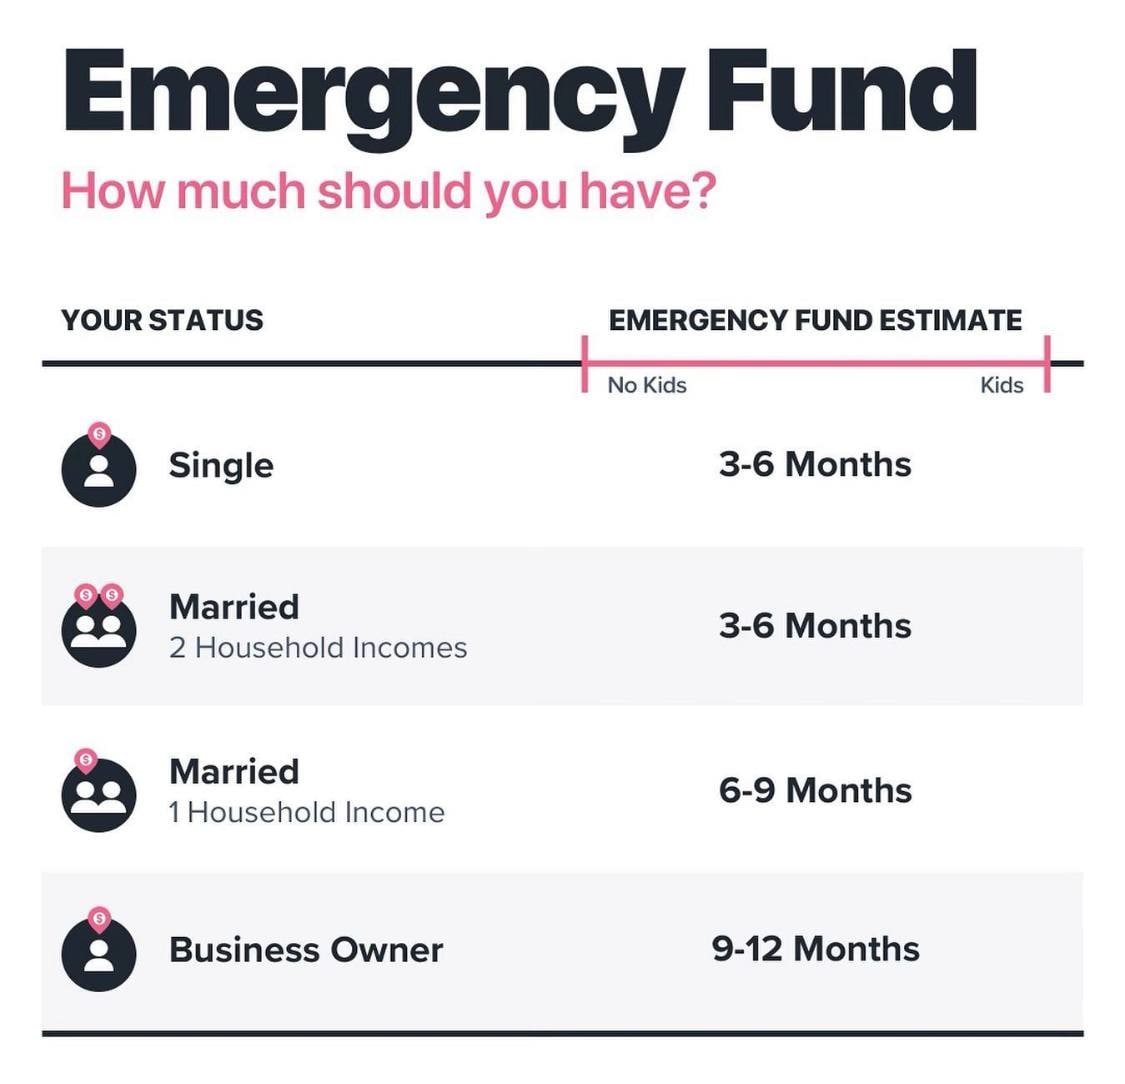 #EmergencyFund 

An emergency fund is a cash reserve that's specifically set aside for unplanned expenses or financial emergencies. 

Some common examples include groceries, car repairs, home repairs, medical bills, or a loss of income.

While the  size of your emergency fund